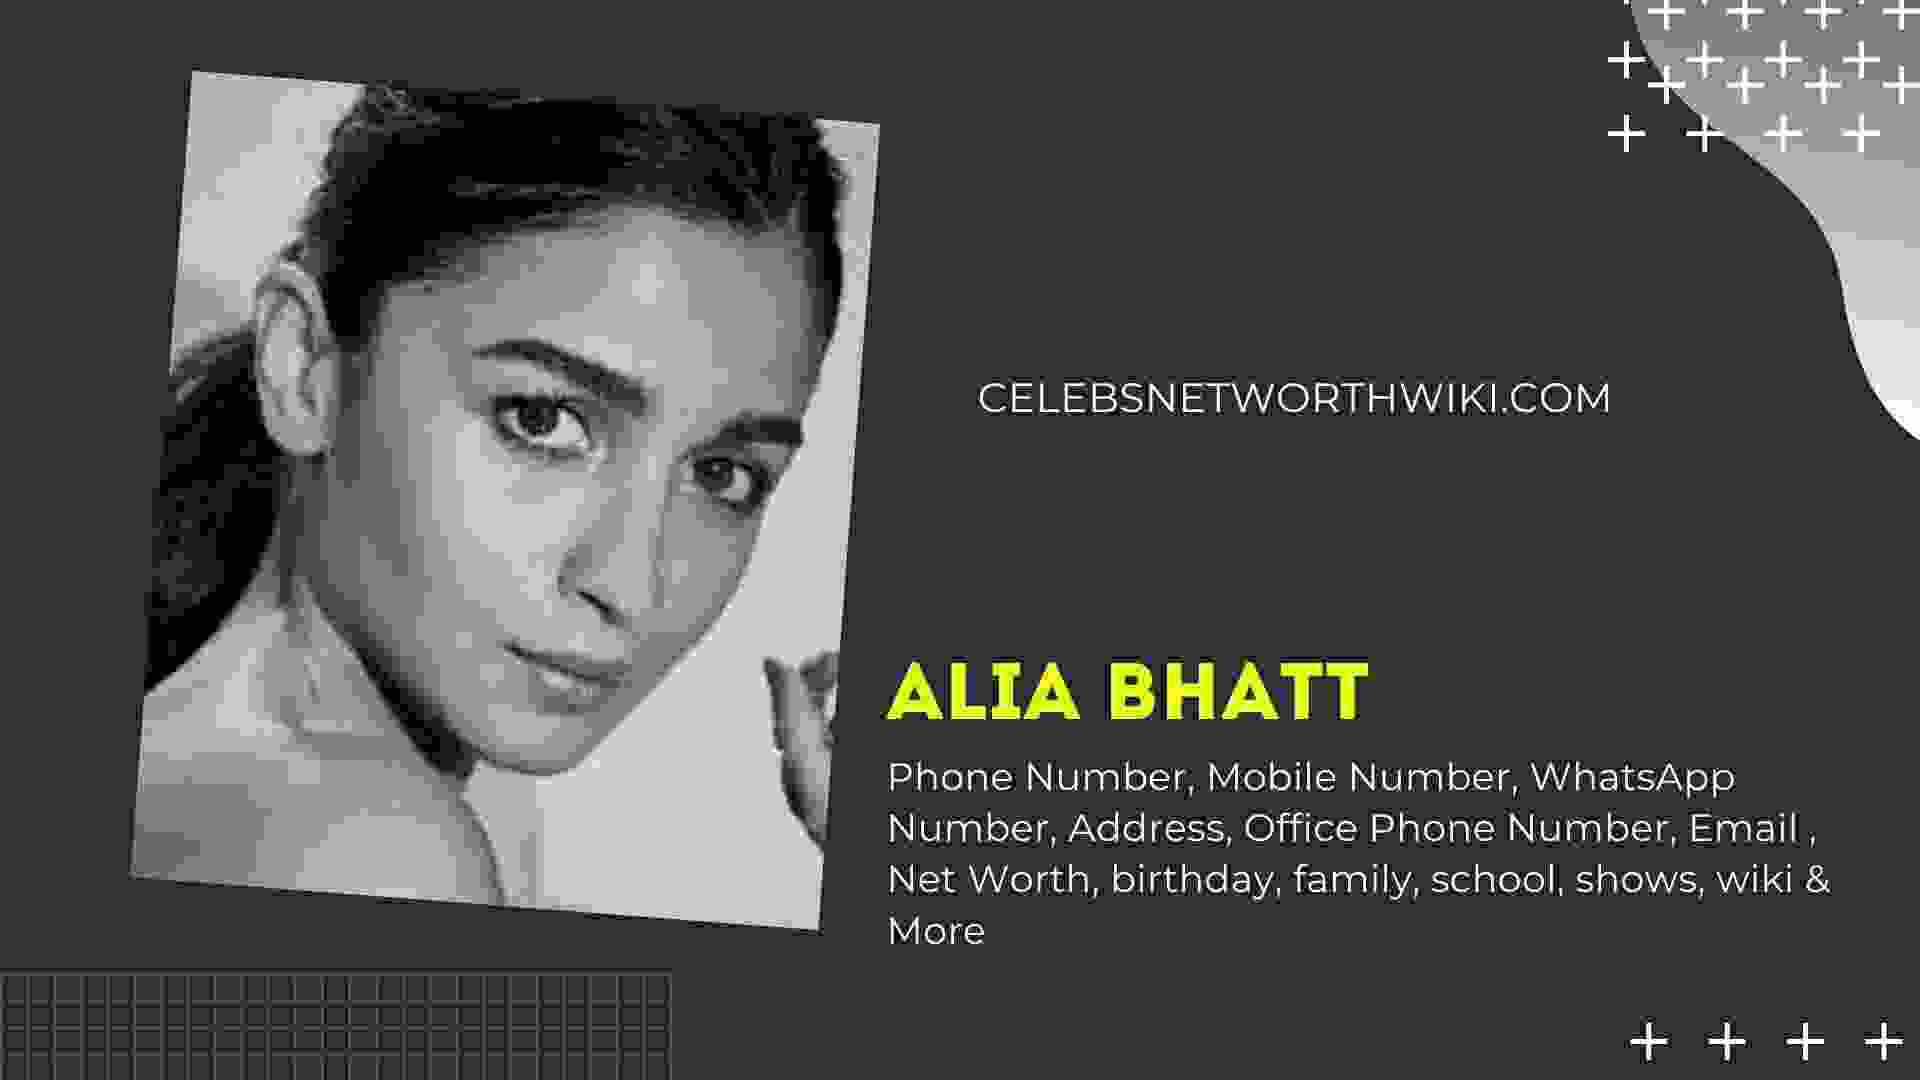 Alia Bhatt Phone Number Whatsapp Number Contact Number Office Phone Number Celebs Networth Wiki Gates was only 23 kids personally reviewed every line of code the company shipped off and rewriting code himself whenever she saw it necessary as the computer. alia bhatt phone number whatsapp